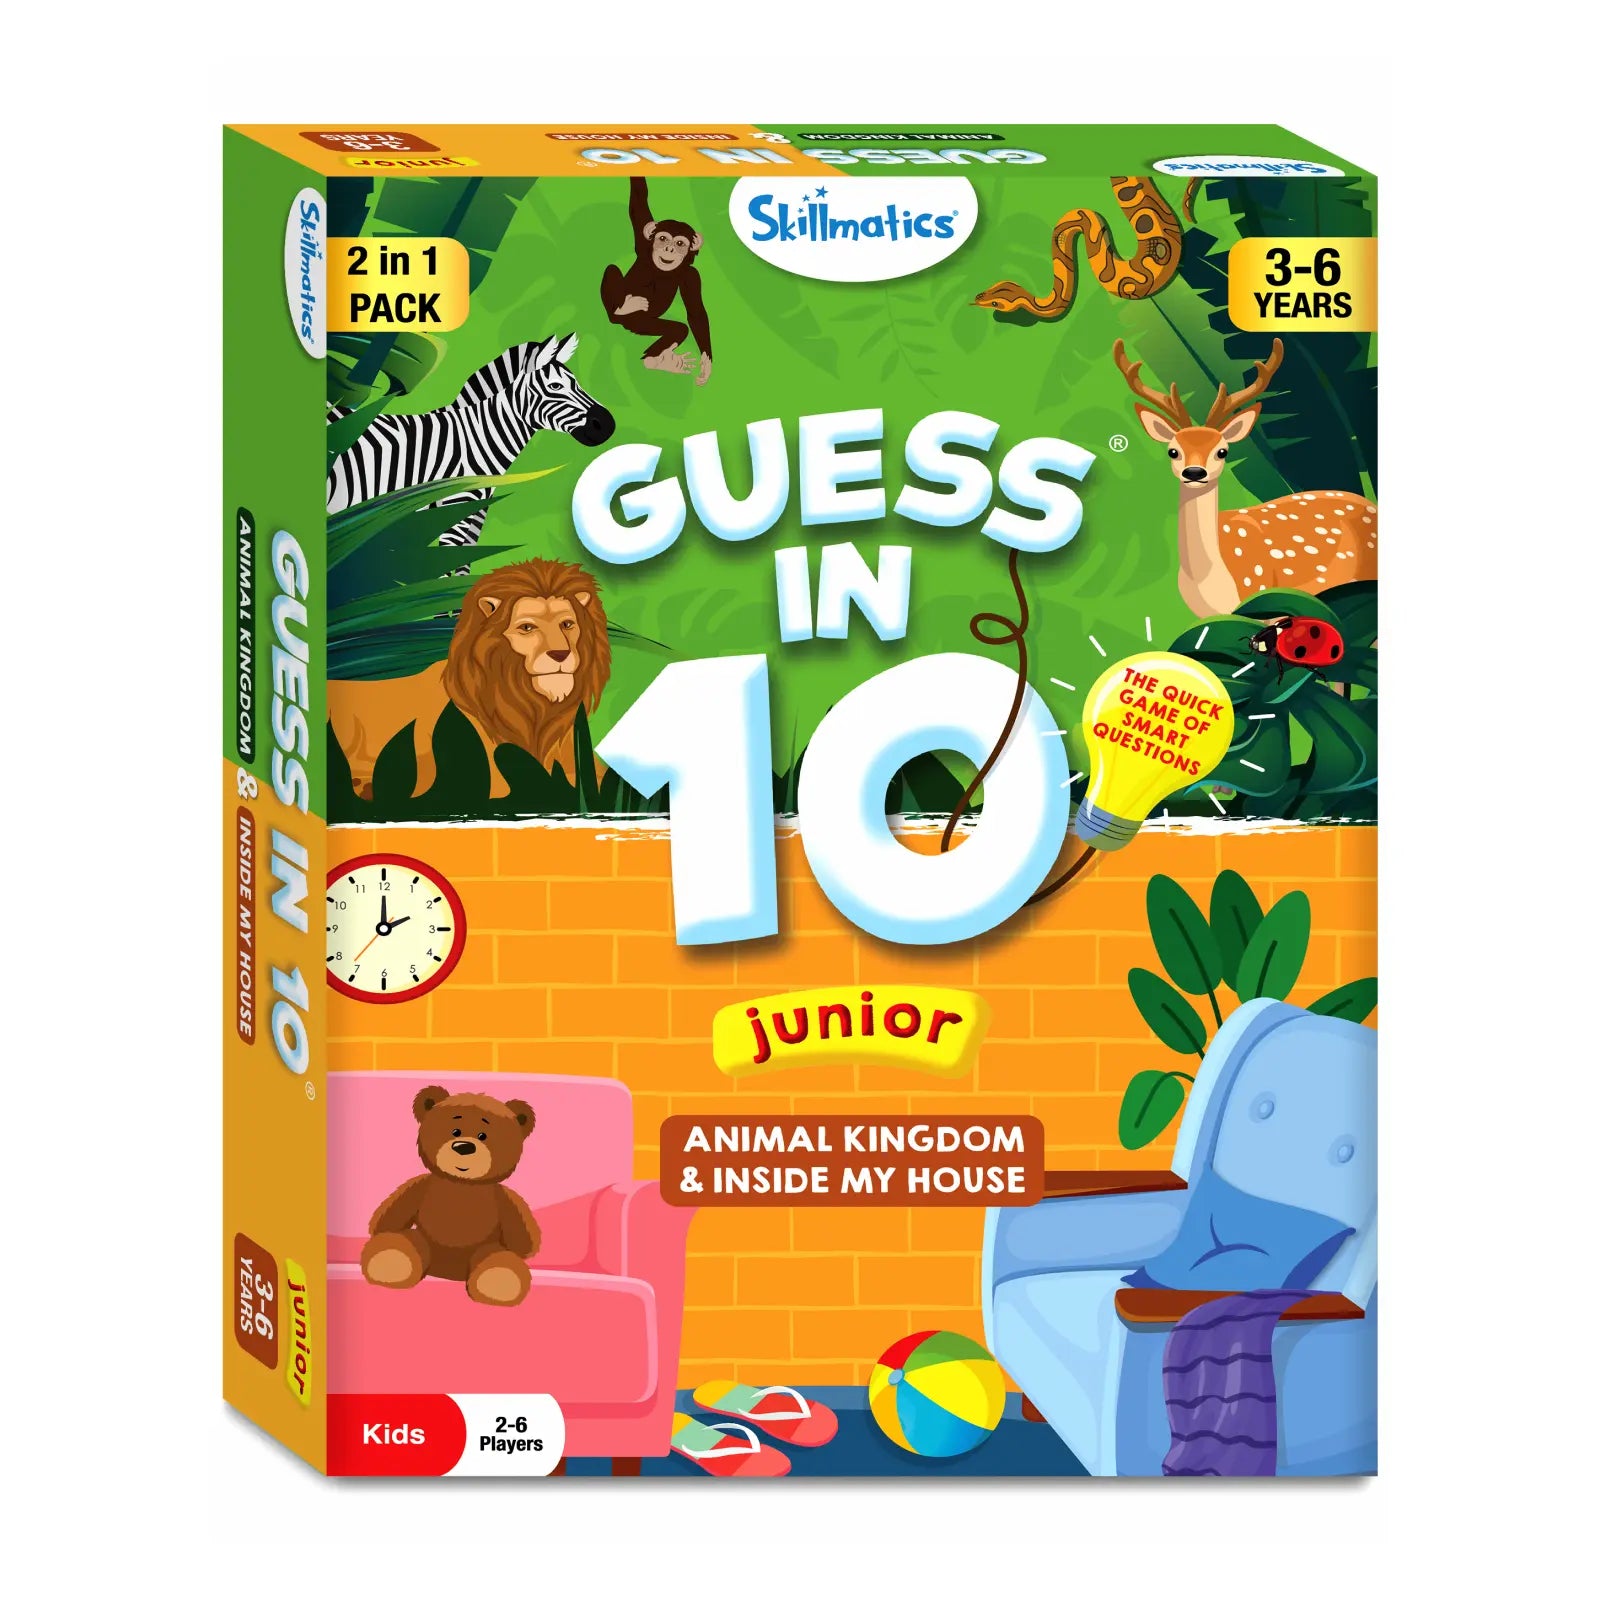 Guess in 10 Jr. - Animal Kingdom & Inside my House Combo